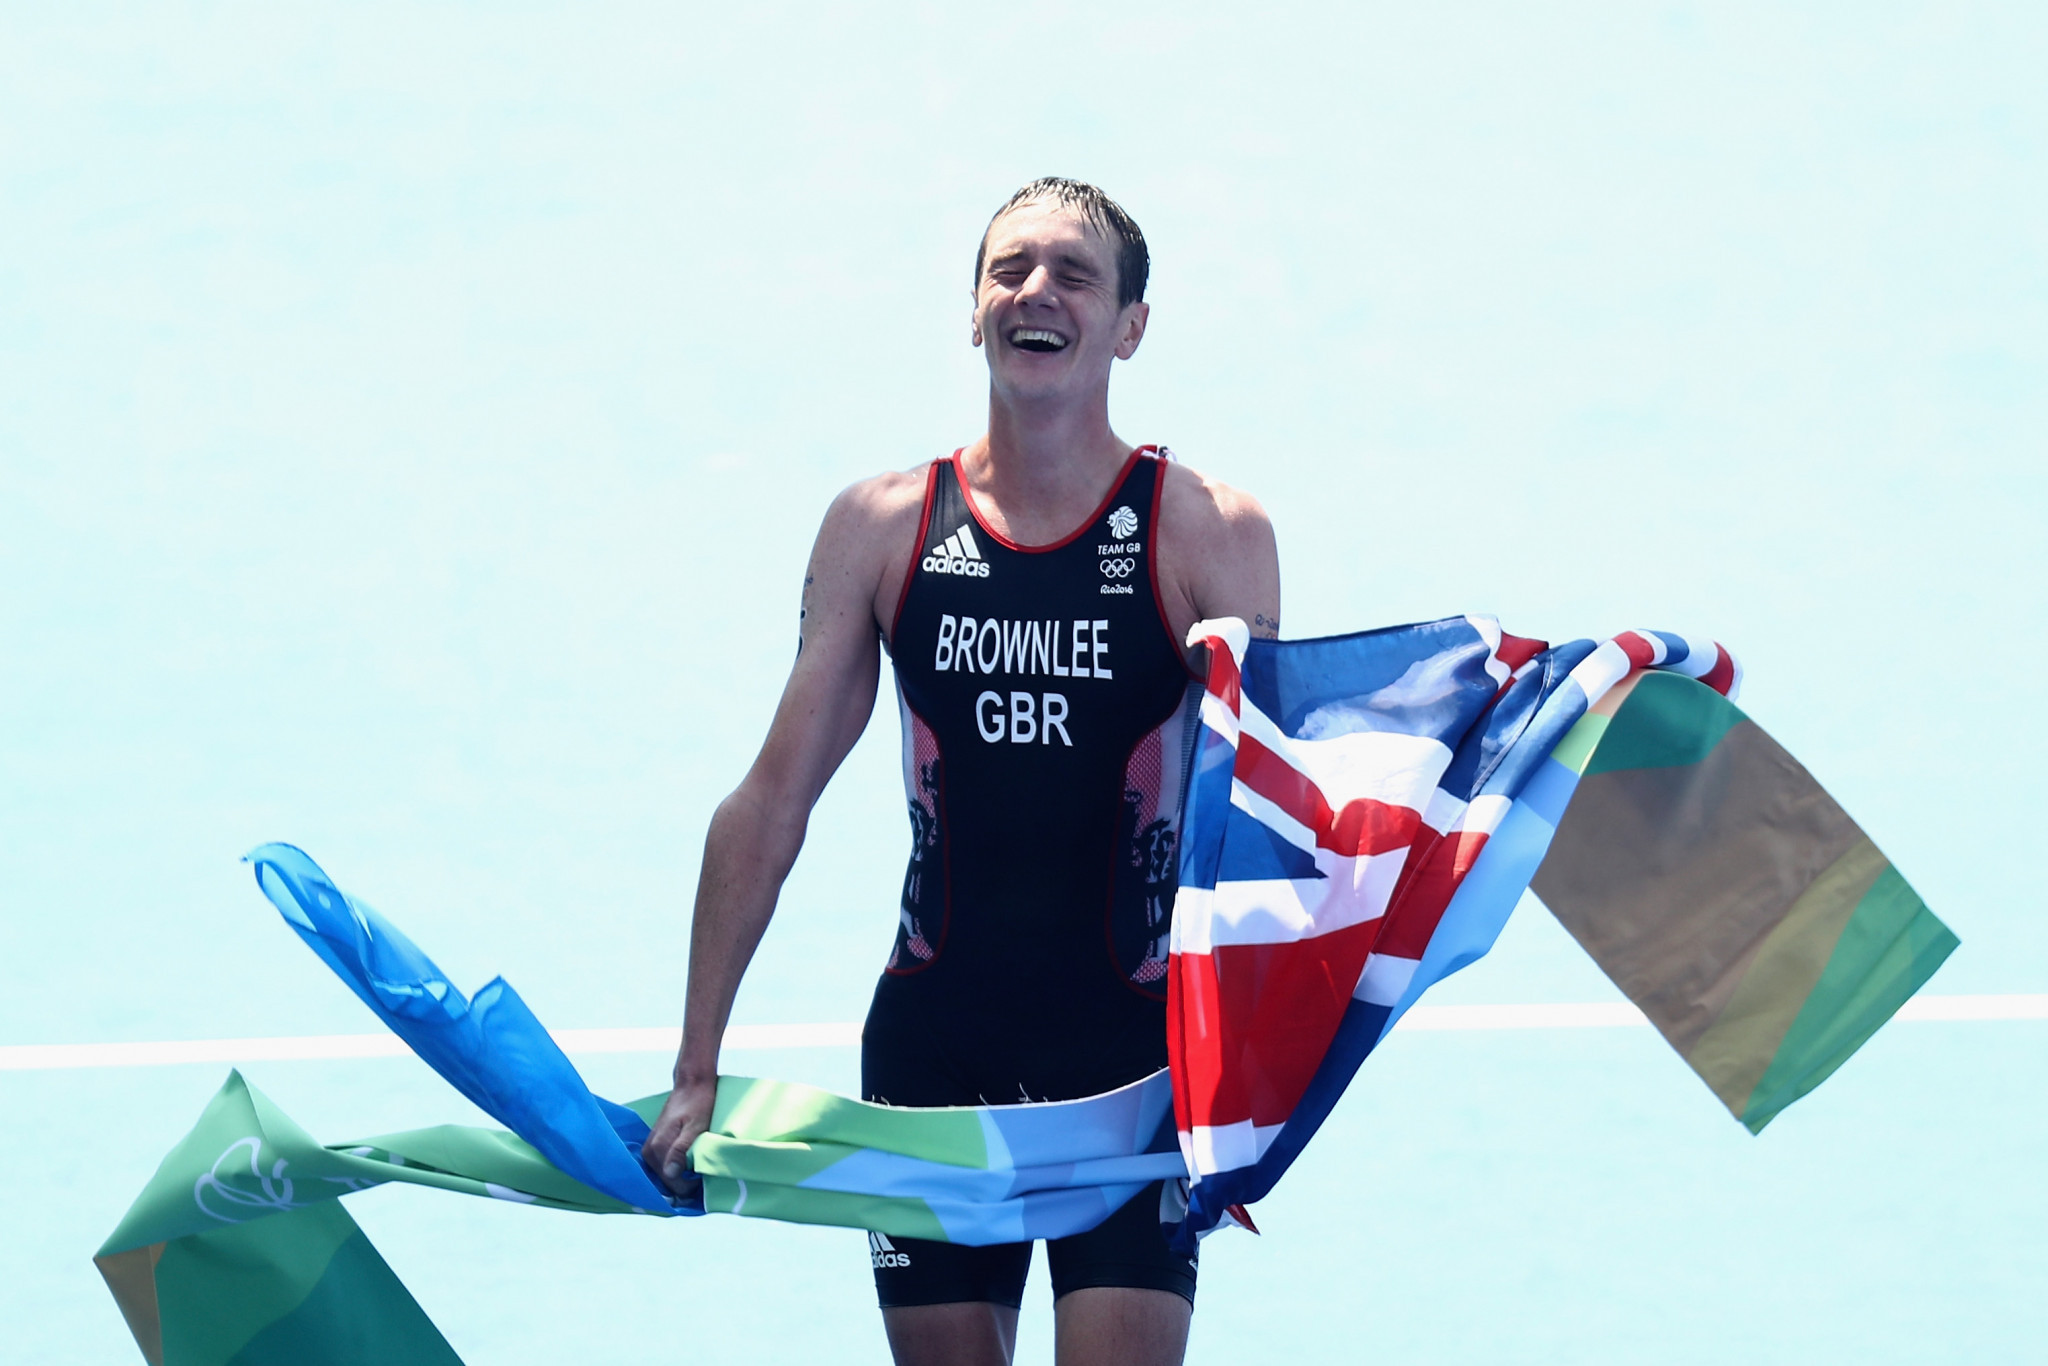 Double Olympic champion Brownlee appointed to British Olympic Foundation Board